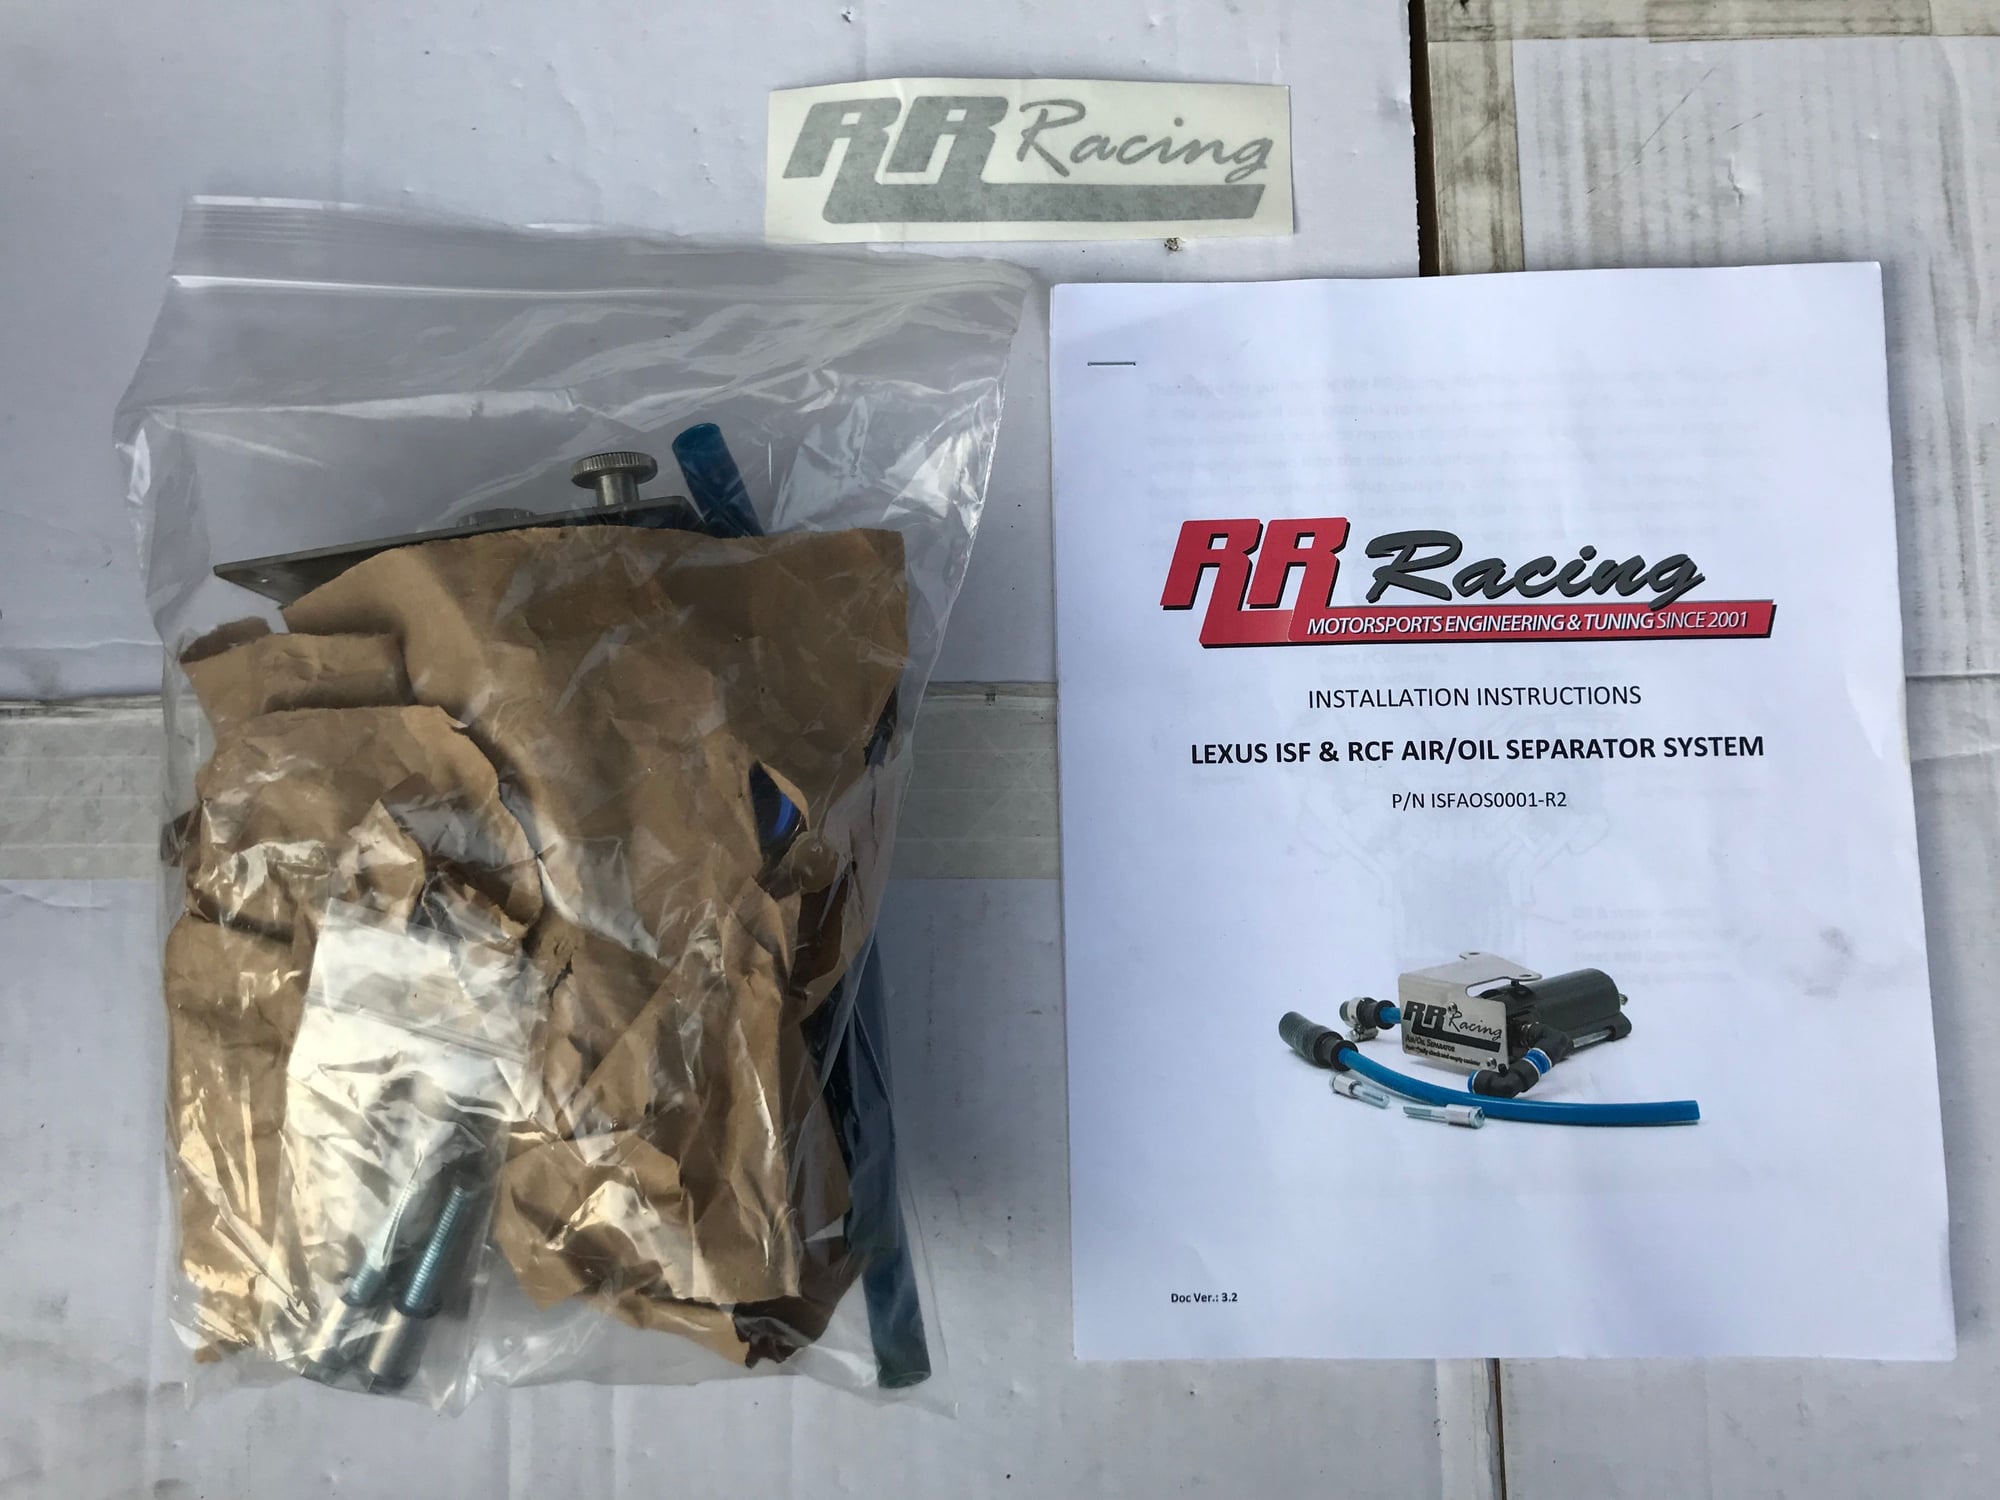 2016 Audi A3 Sportback e-tron - RR Racing Air Oil Separator - Engine - Intake/Fuel - $125 - Vancouver, BC V7N3R3, Canada